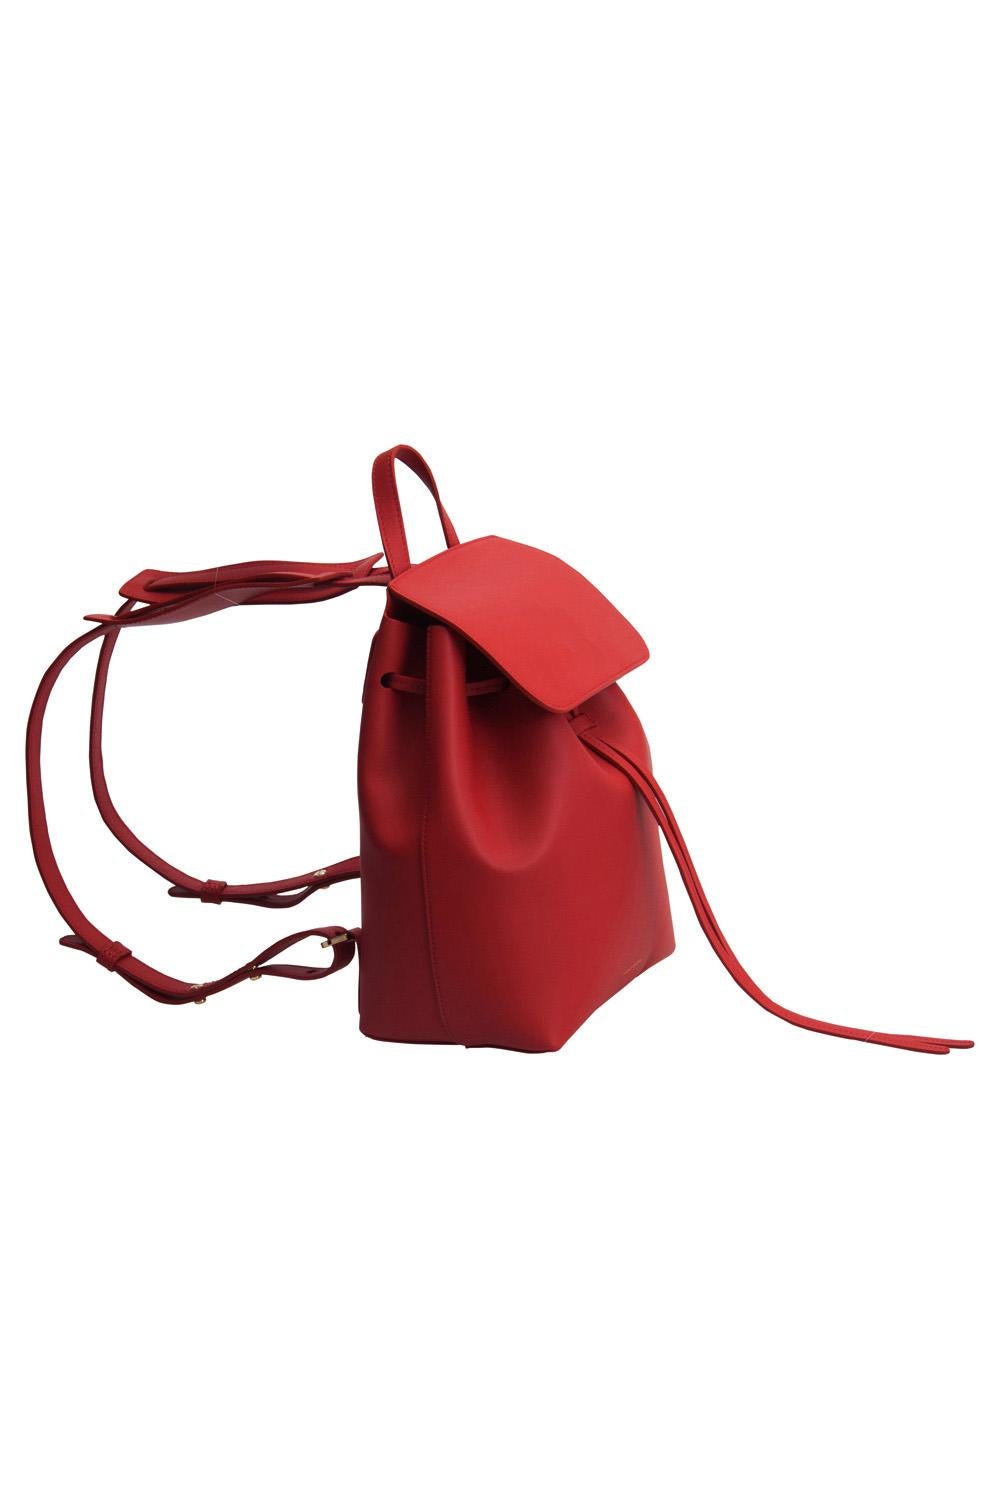 This stylish backpack from Mansur Gavriel is crafted from red leather and enhanced with gold-tone hardware. The bag features a top handle and adjustable shoulder straps. A flap secures the drawstring closure that opens to reveal a spacious